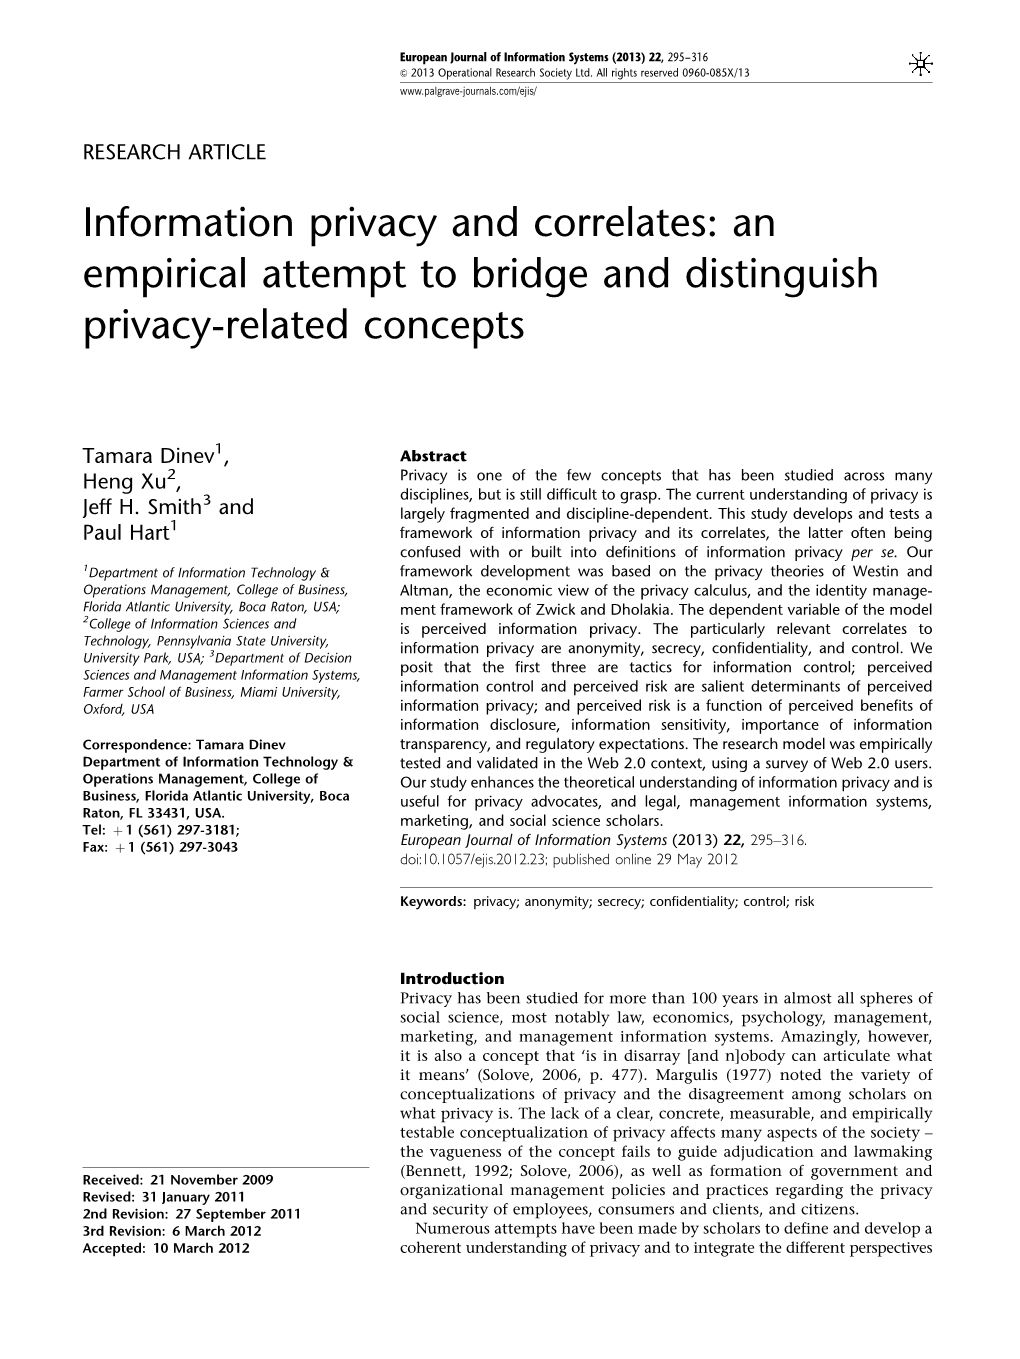 An Empirical Attempt to Bridge and Distinguish Privacy-Related Concepts